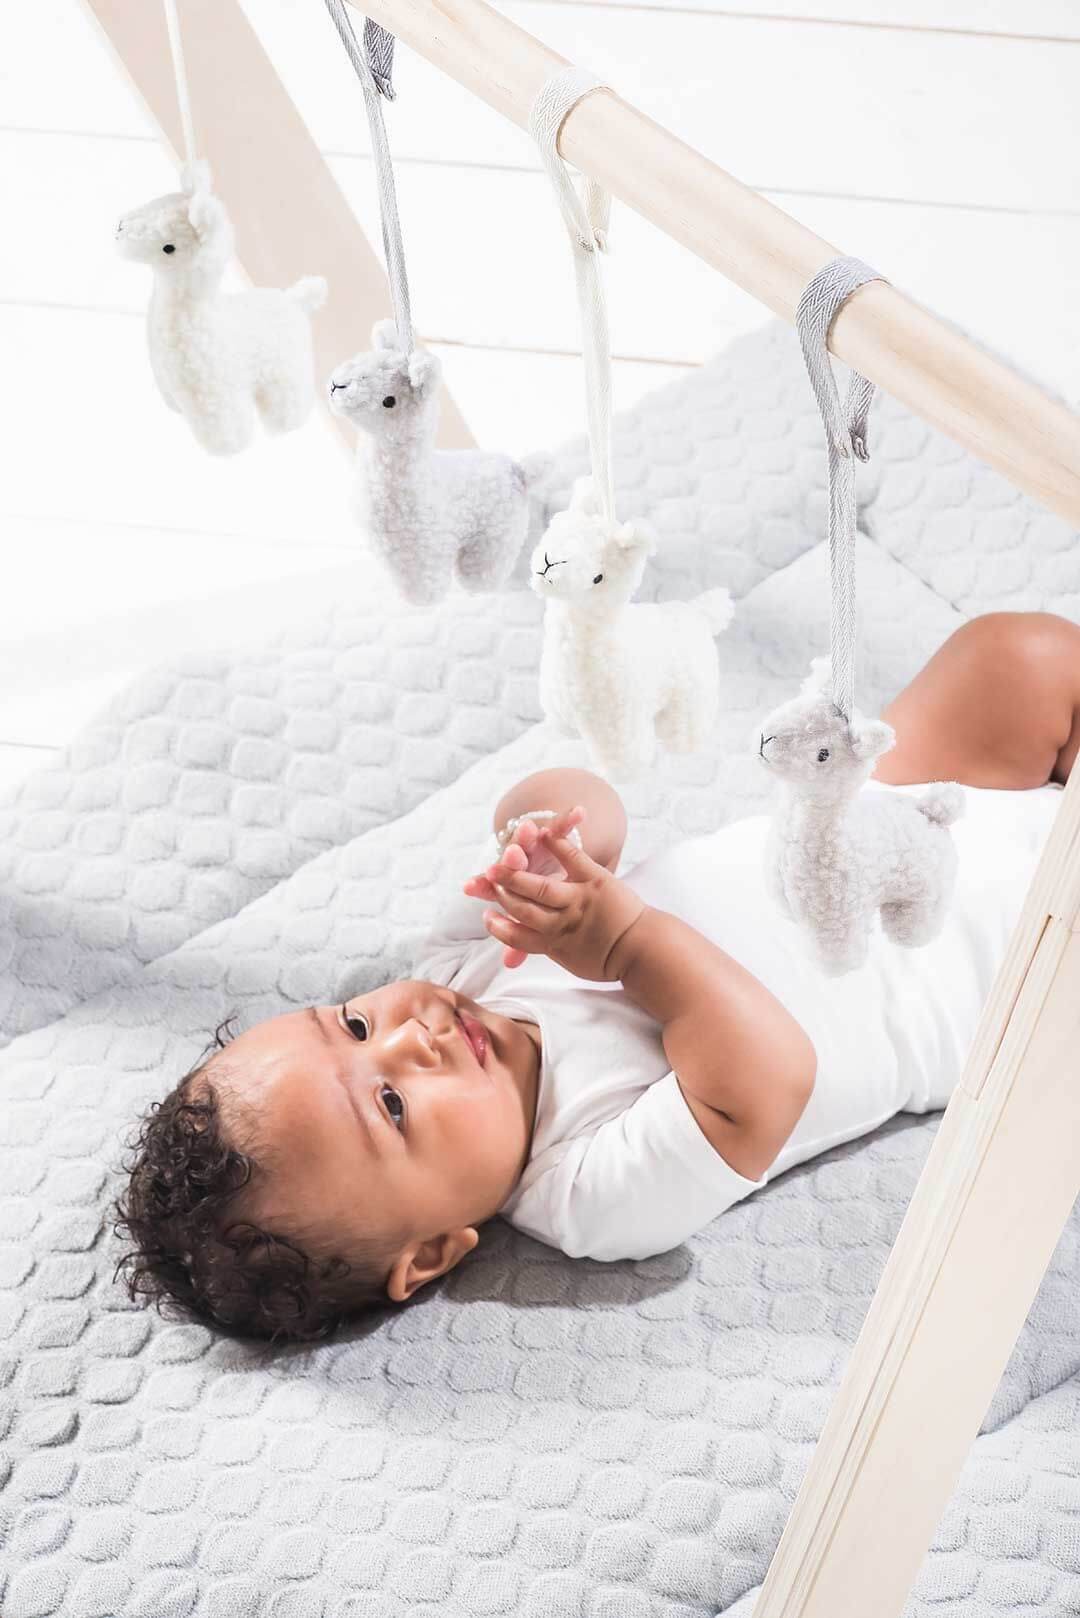 Deer Industries Baby Toy, Baby Gym Toy Llama Jollein, Baby Accessories Online Singapore, Gift Ideas for babies, gender neutral baby toy